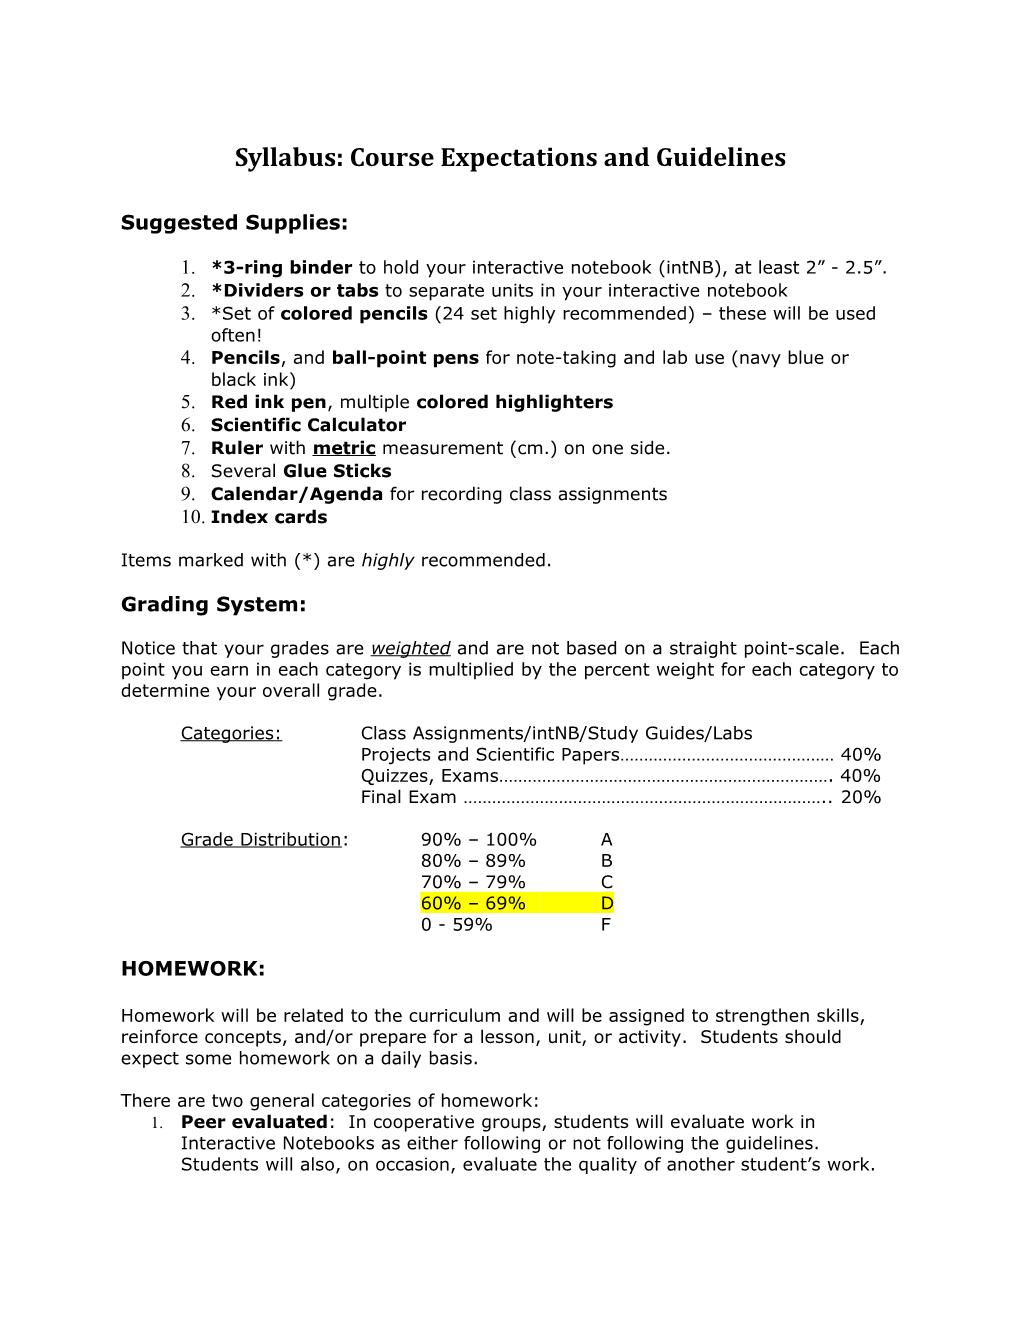 Syllabus: Course Expectations and Guidelines